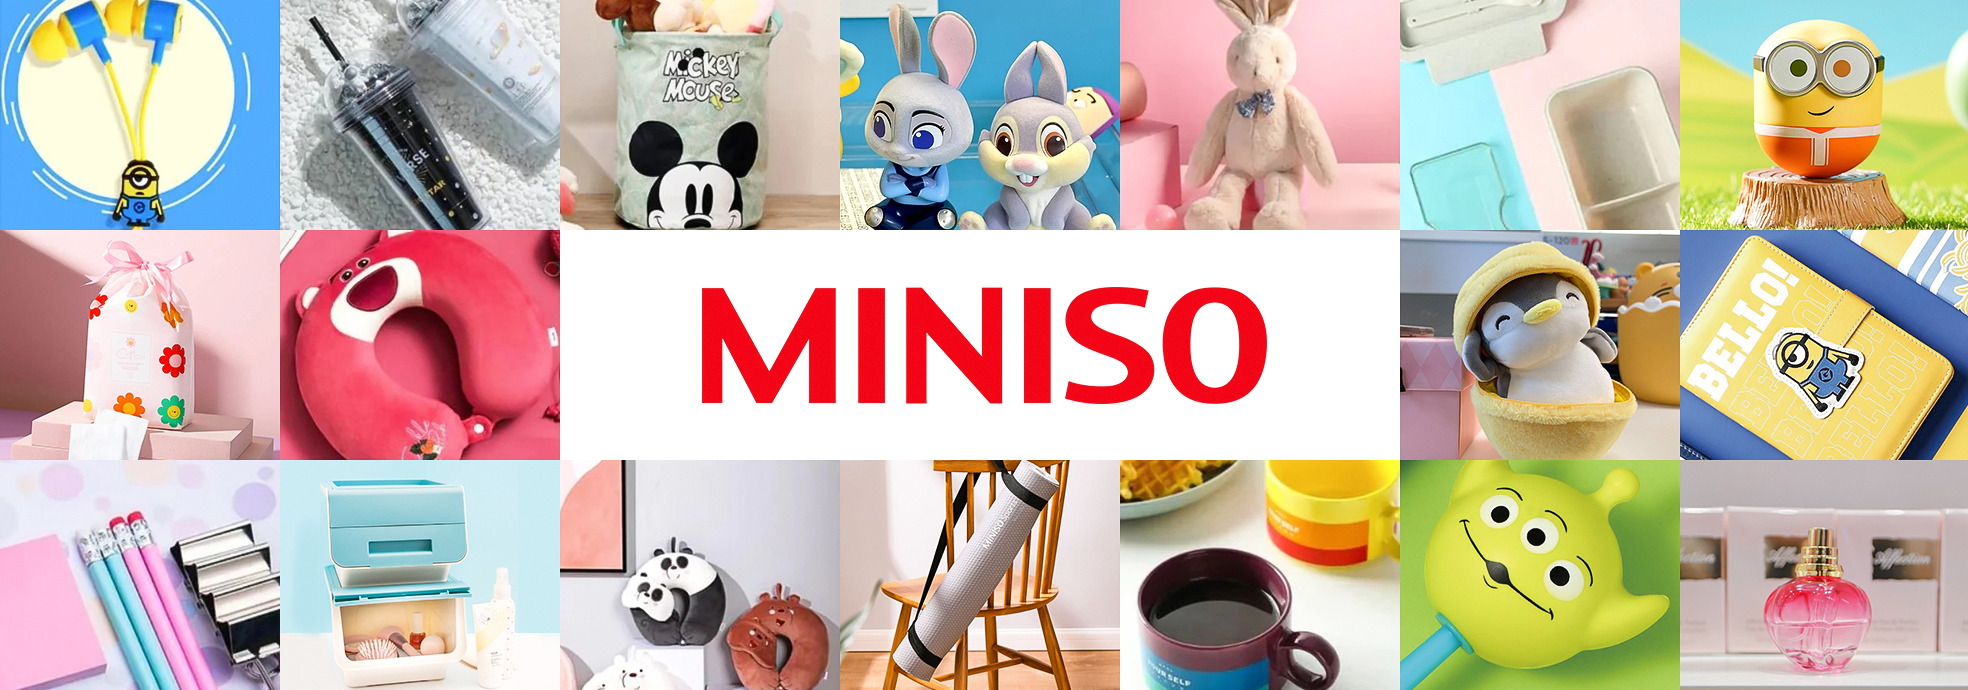 Mixed media feed | Miniso Thailand | LINE Official Account